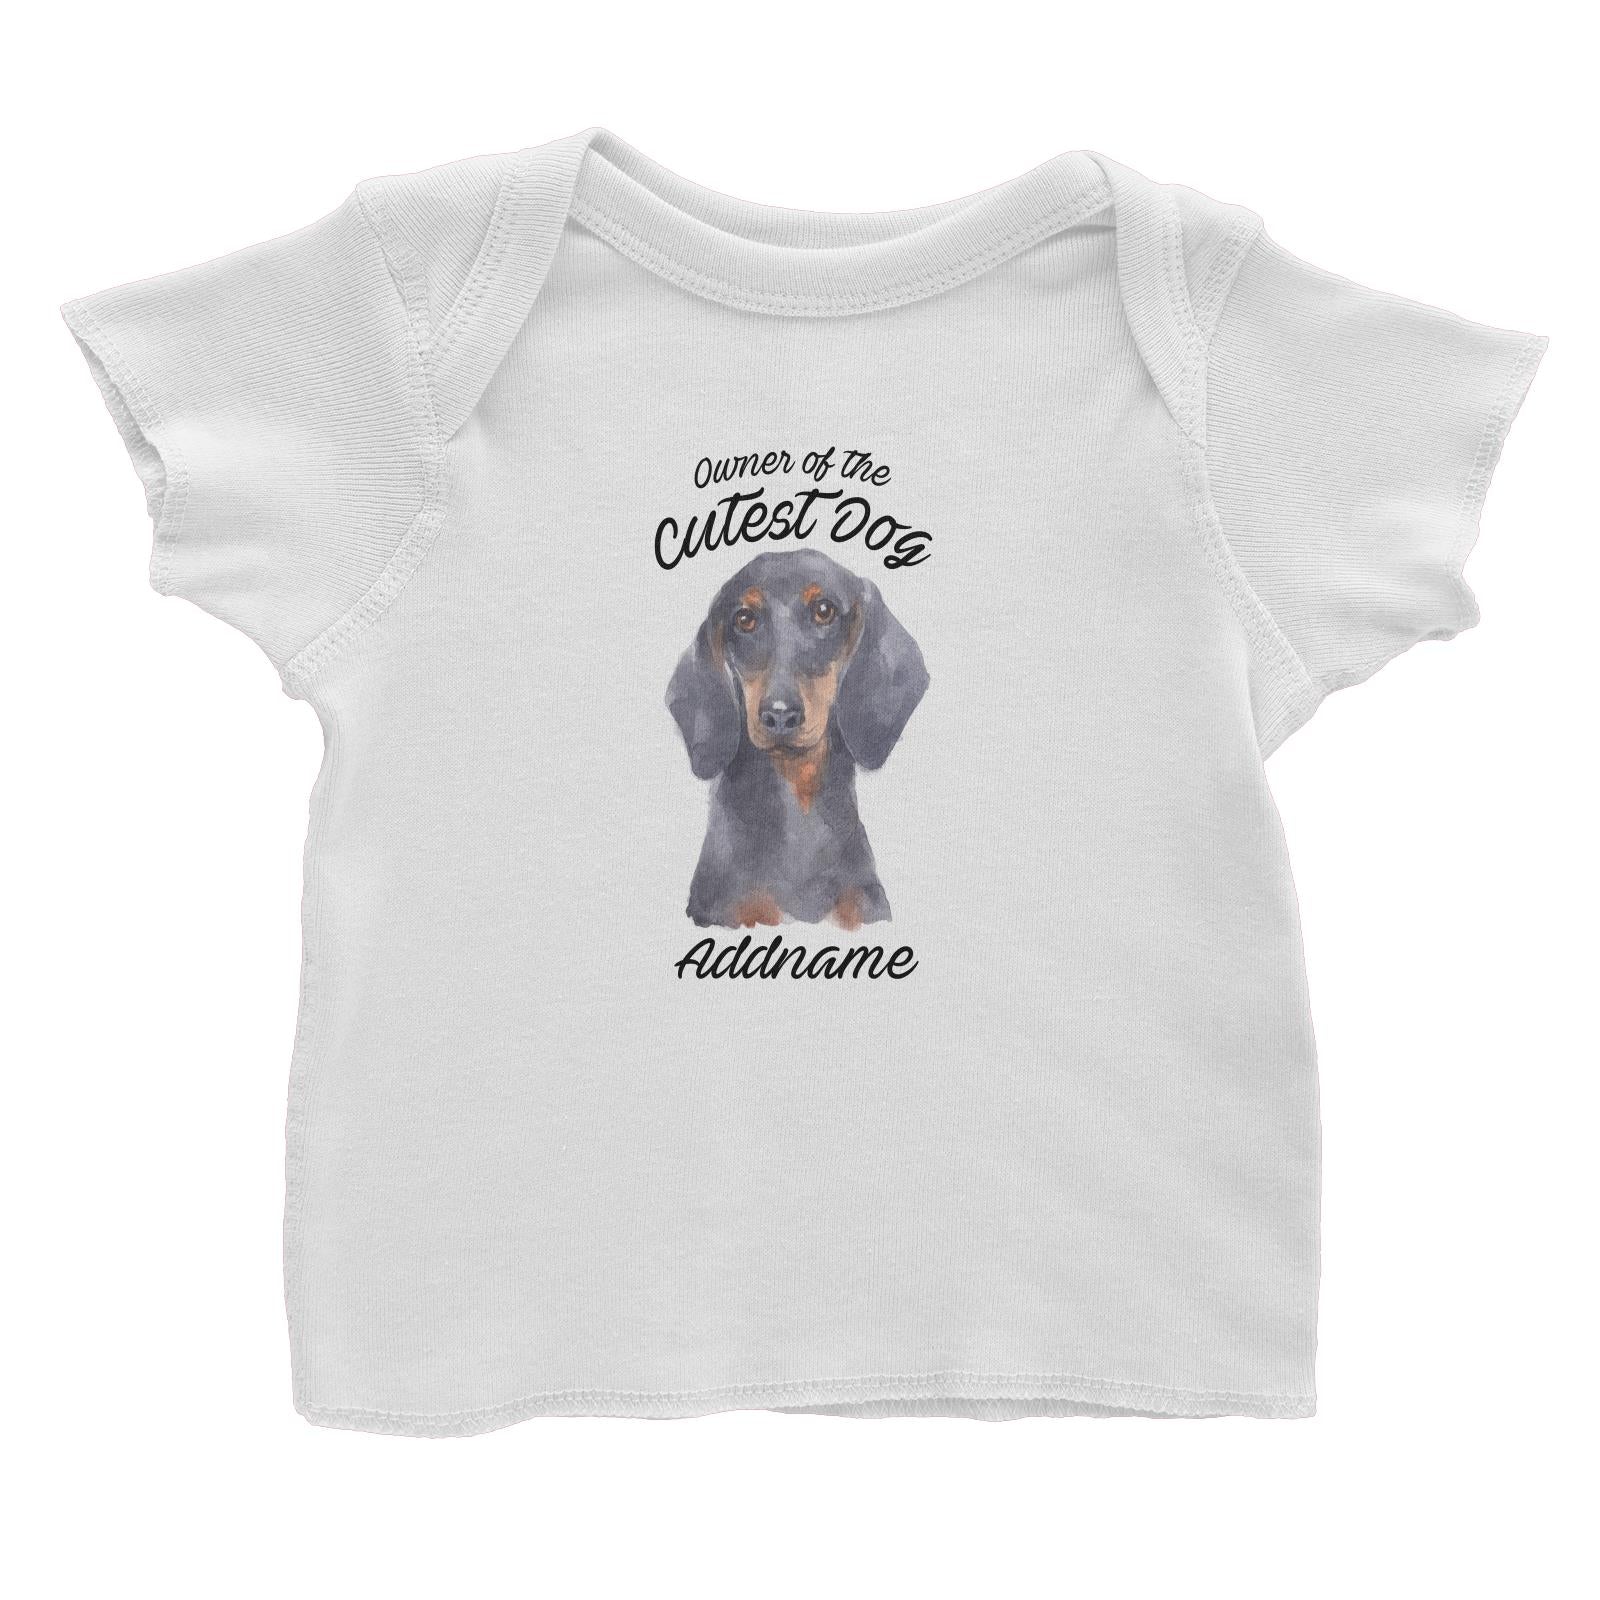 Watercolor Dog Owner Of The Cutest Dog Dachshund Addname Baby T-Shirt